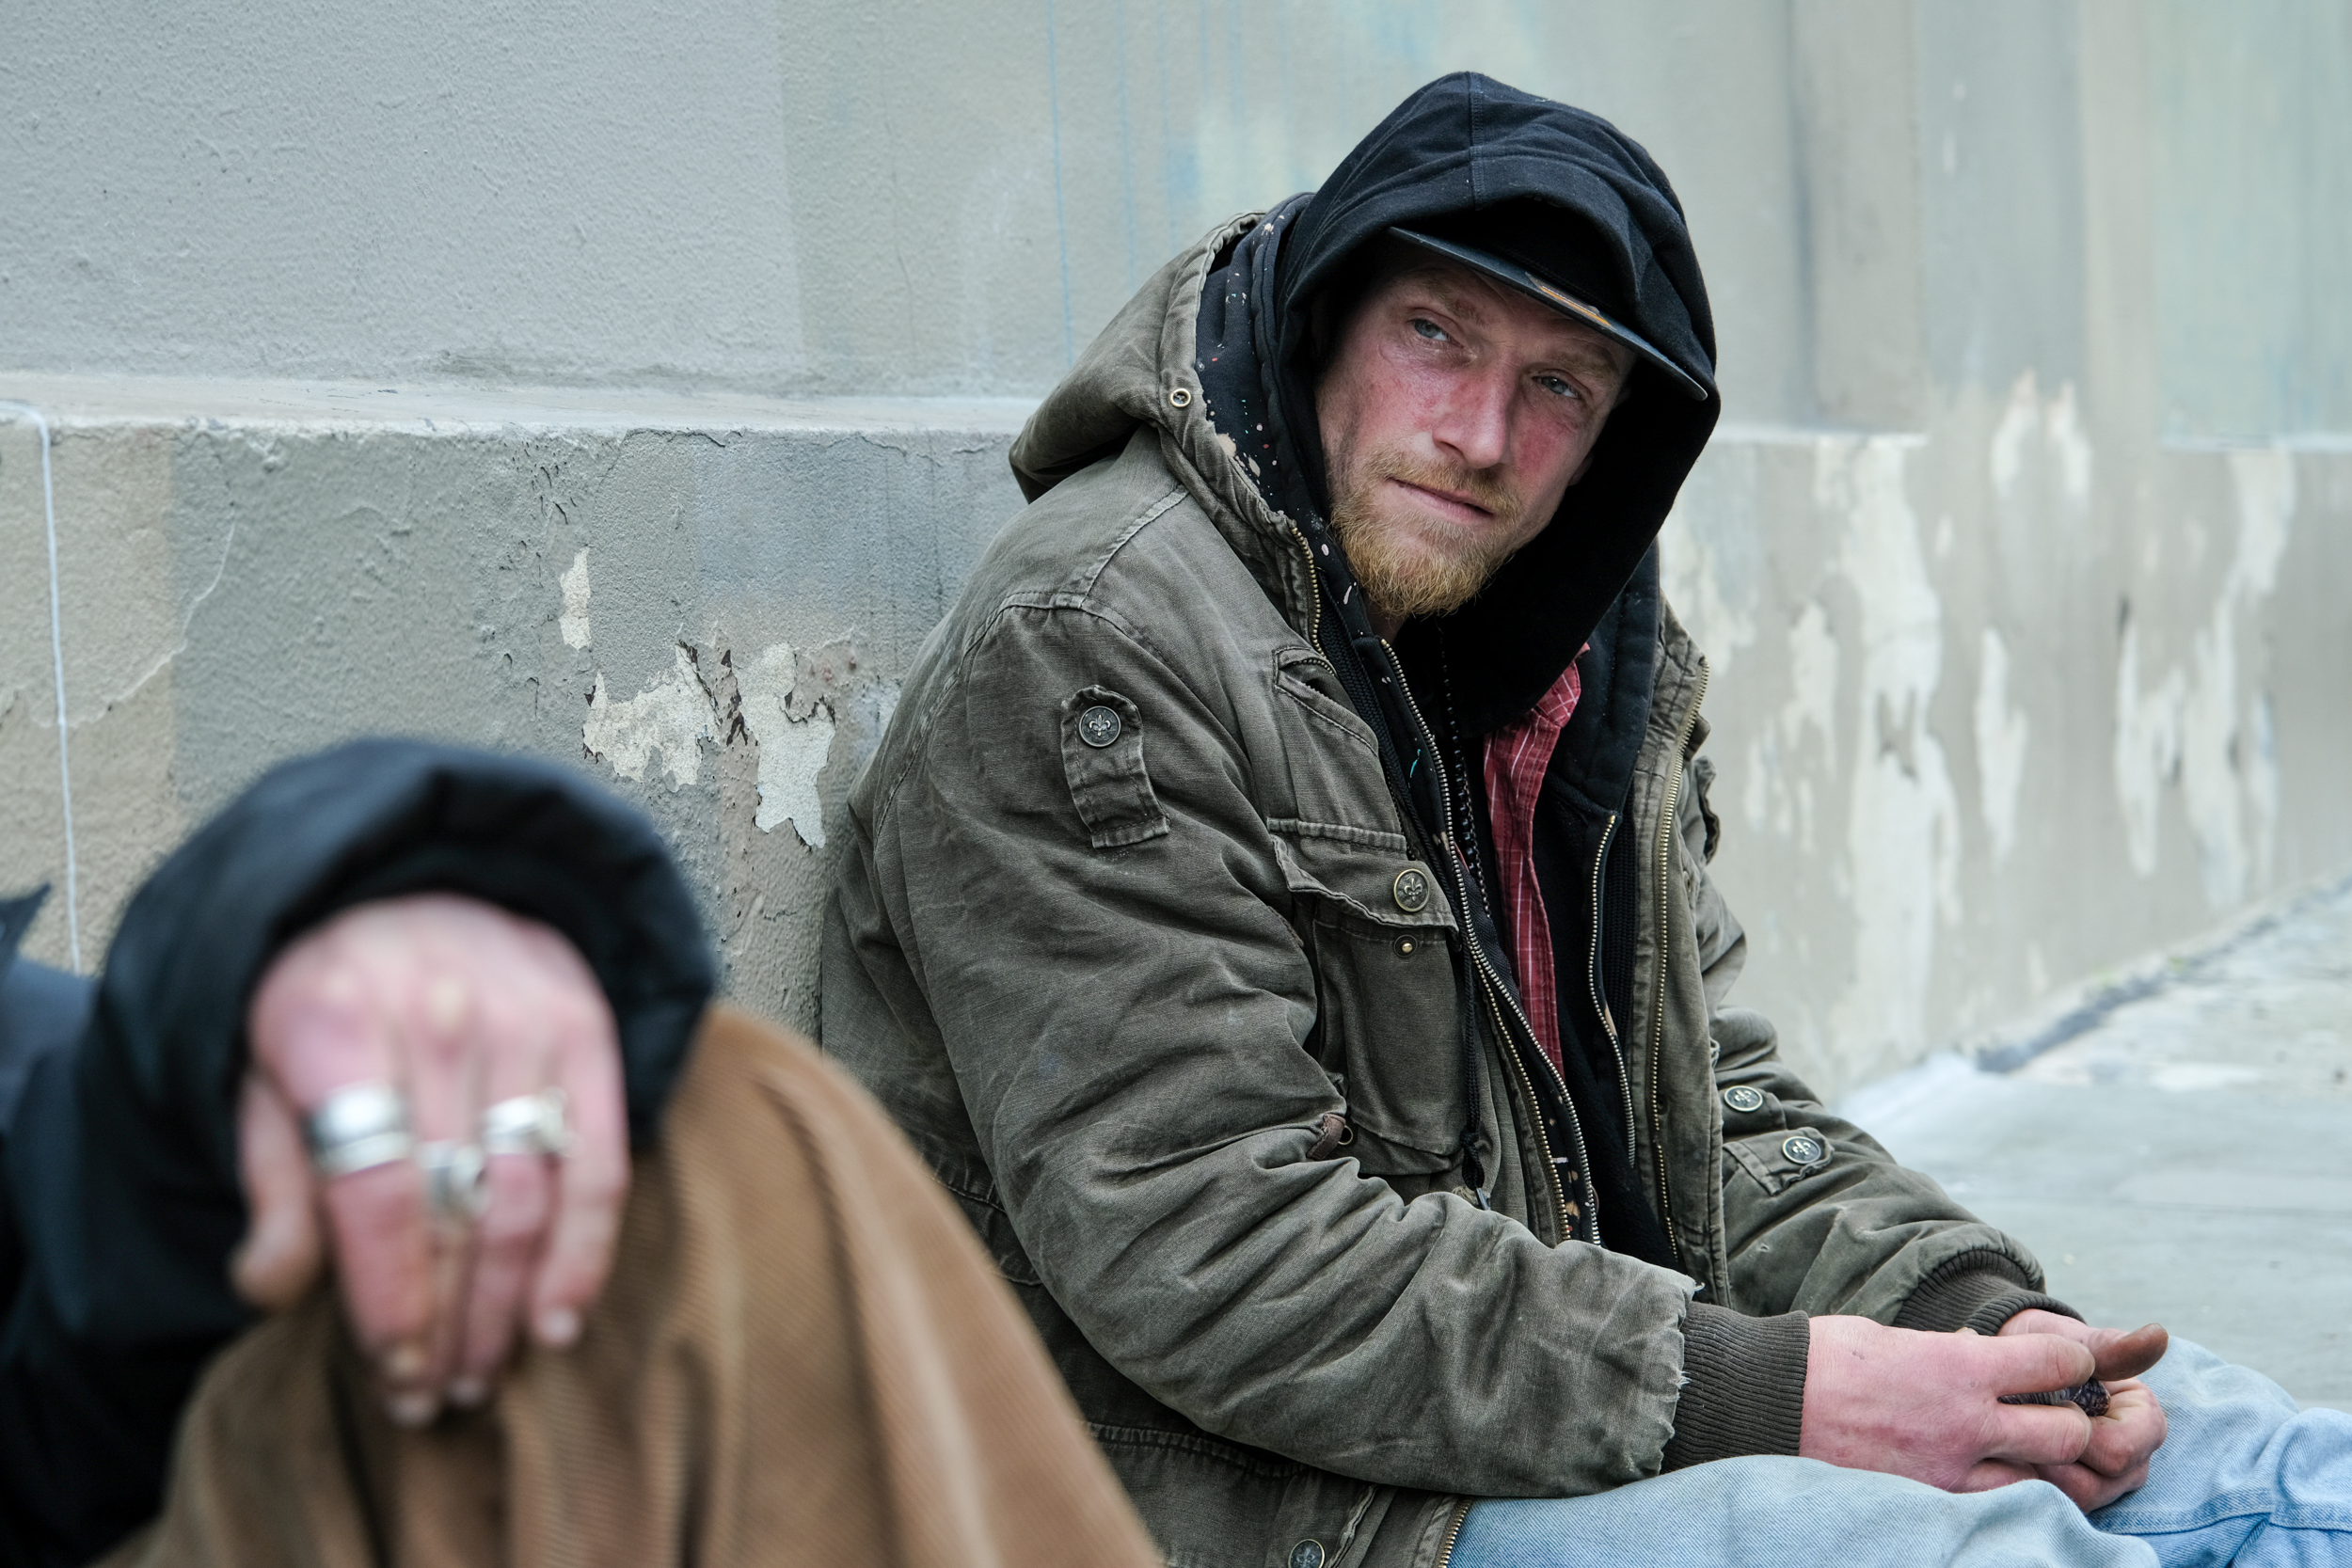 A man in a hooded jacket sits against a wall, looking at the camera, another person's hand in the foreground.